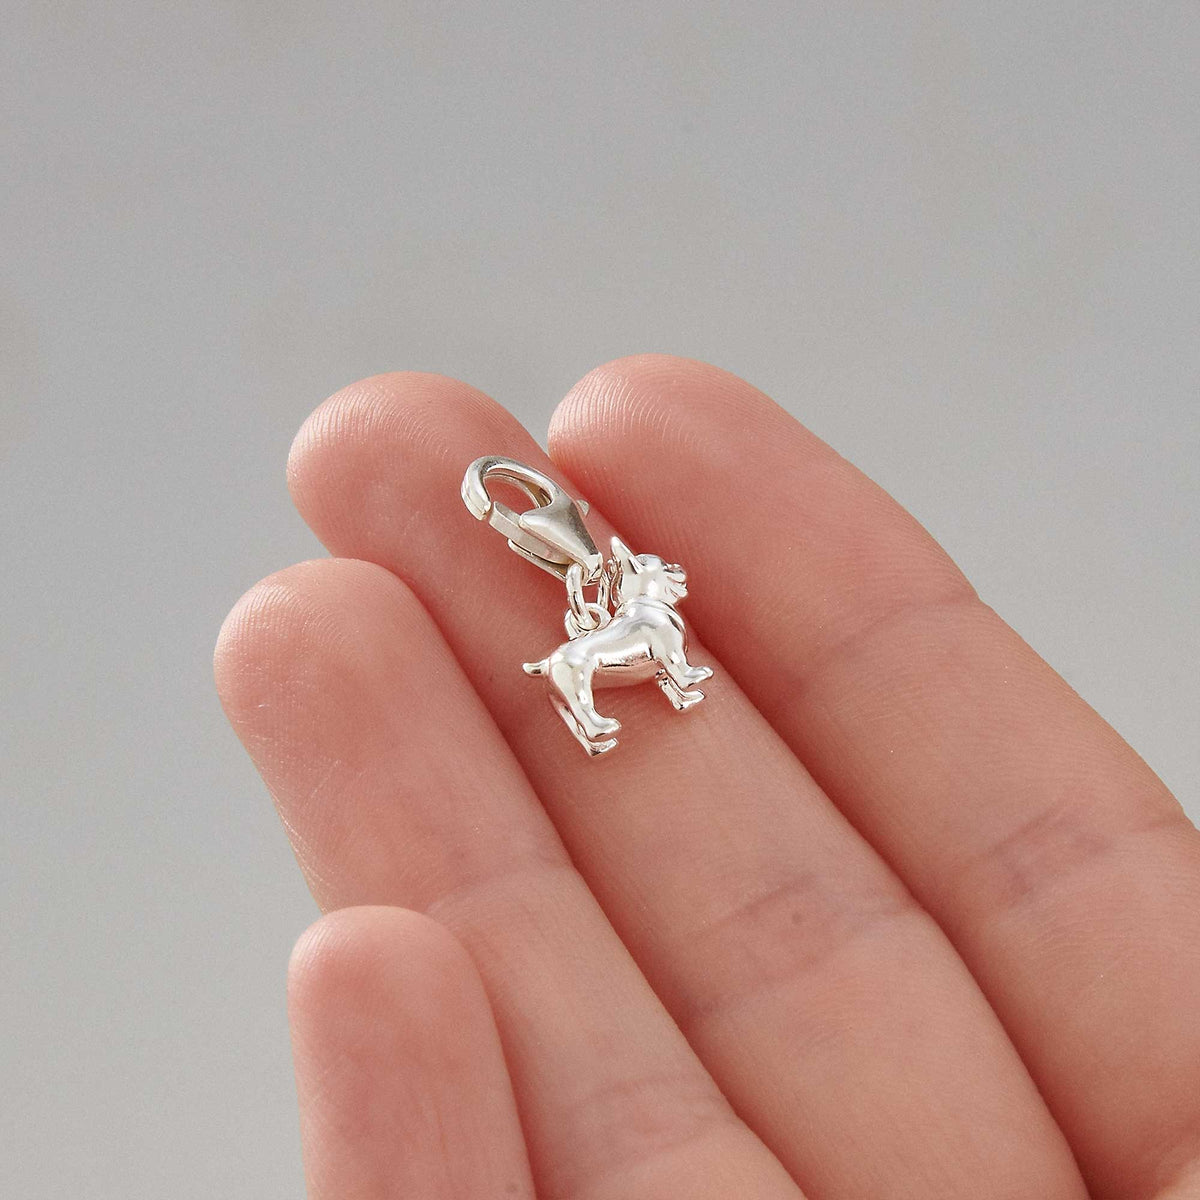 French Bulldog silver dog breed solid sterling silver dog charm with clip lobster catch Scarlett Jewellery Ltd